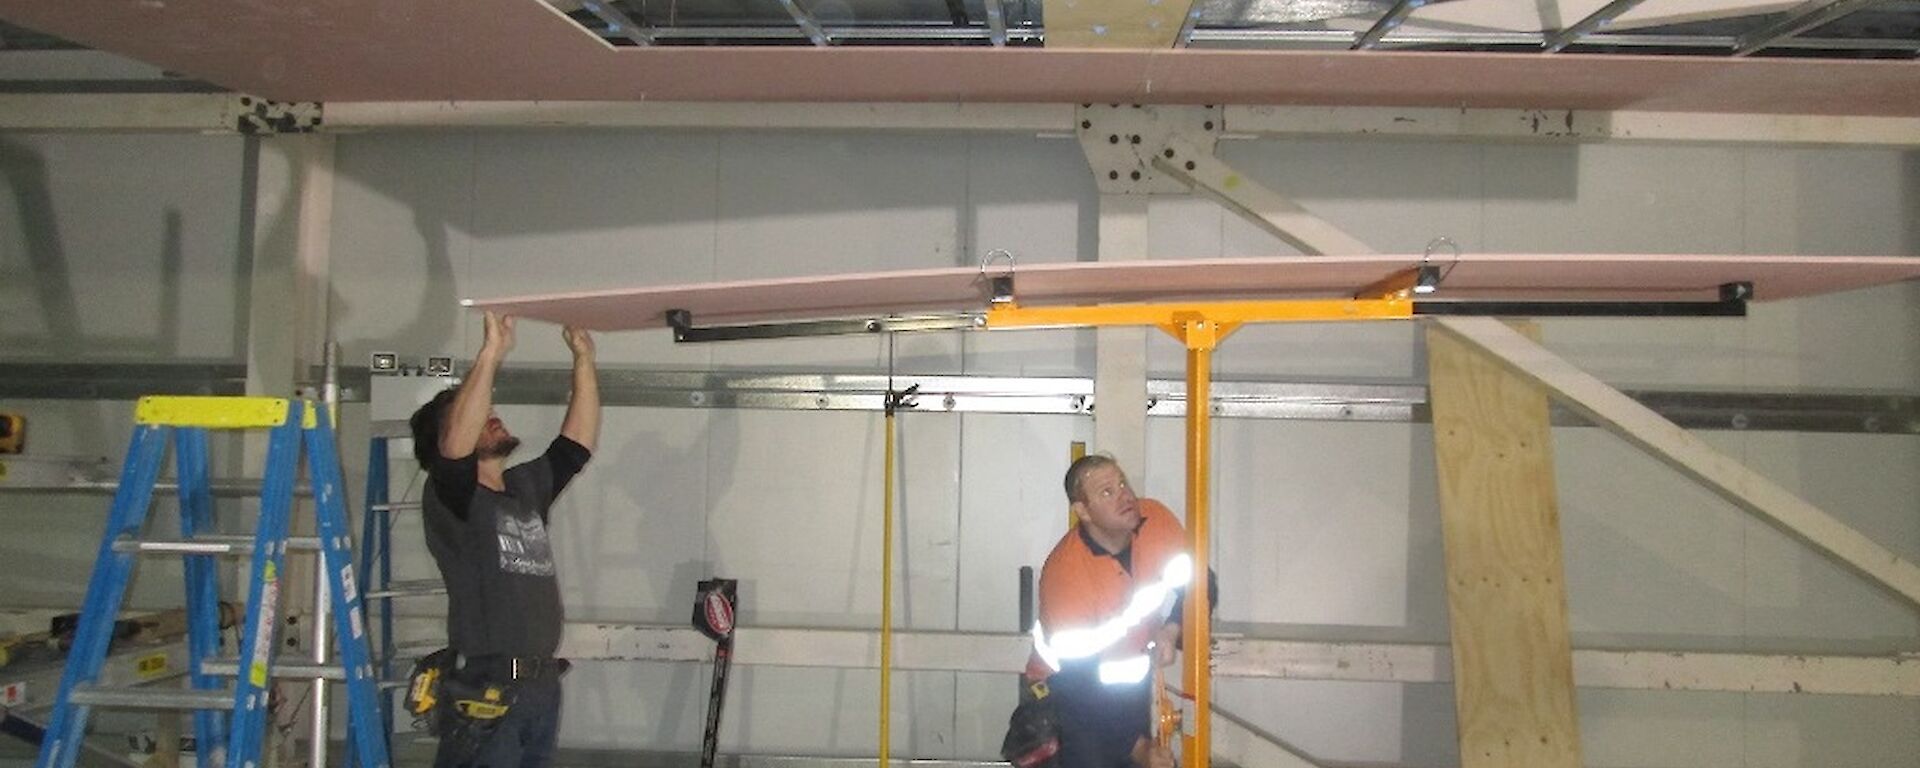 Two carpenters with a sheet of plaster on the plaster lifting device as they line it up ready for the lift it up to the ceiling supports.